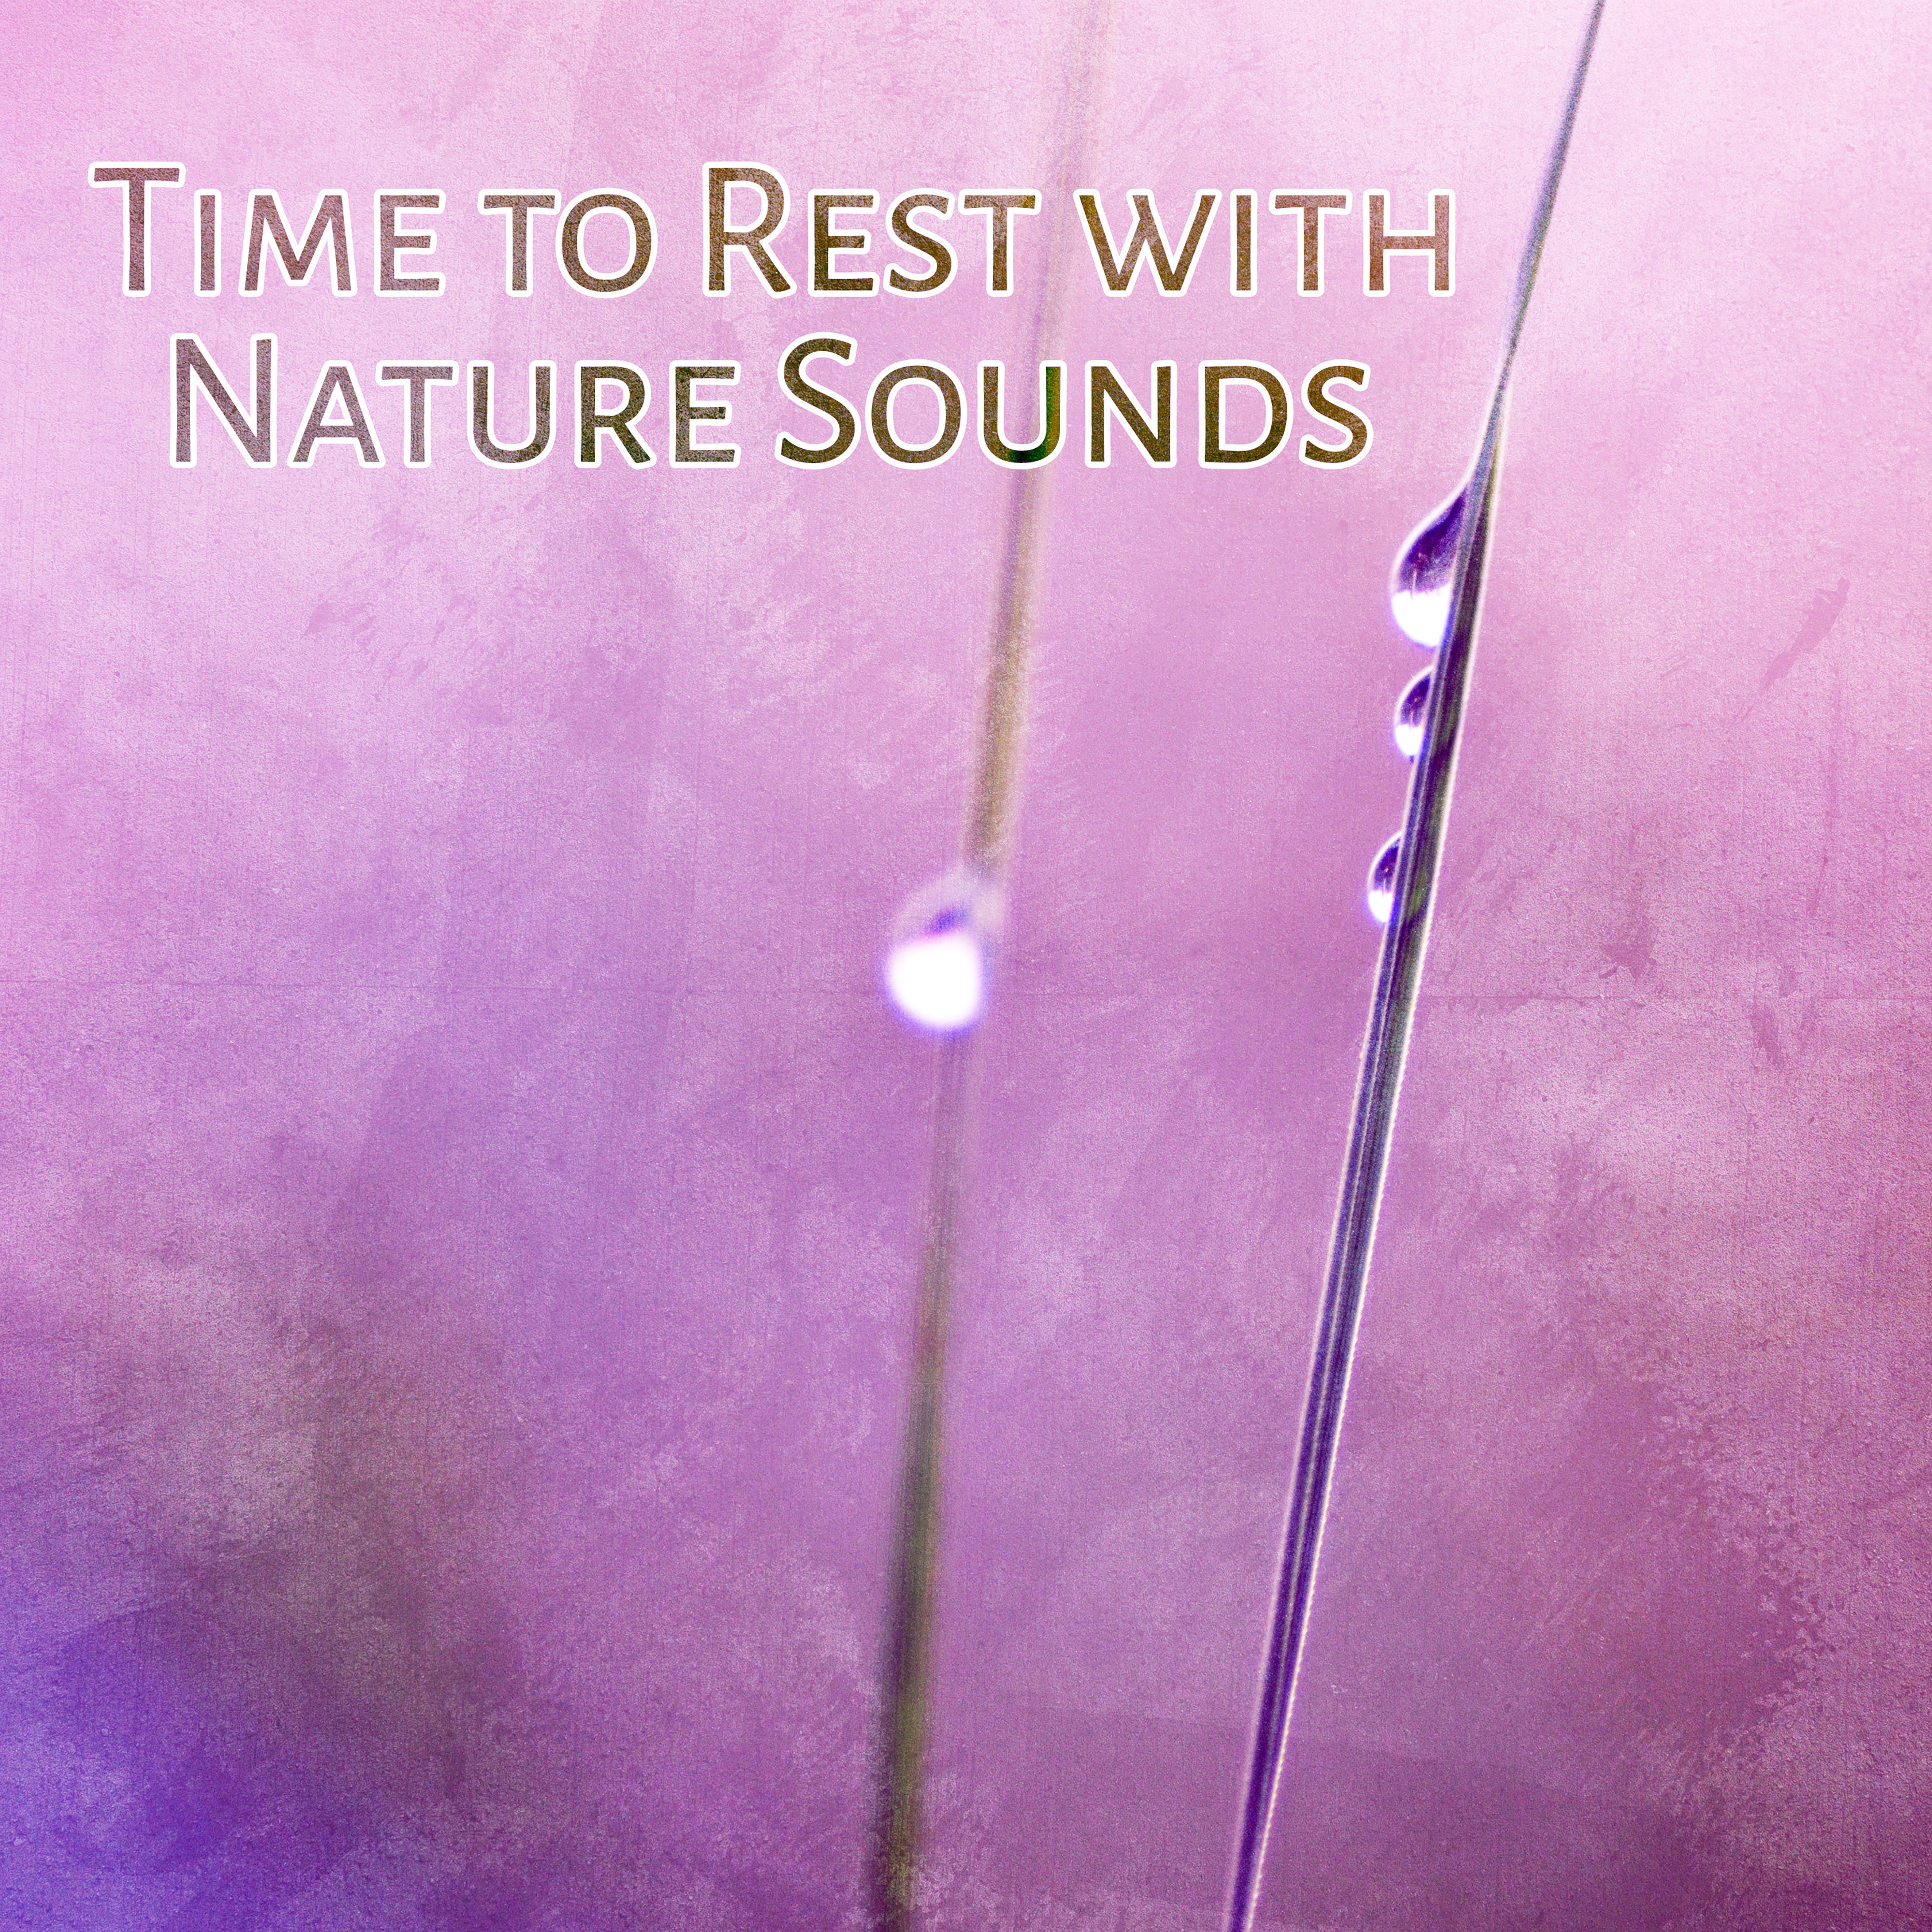 Time to Rest with Nature Sounds – Music to Calm Down, Nature Waves to Rest, Relaxing Music